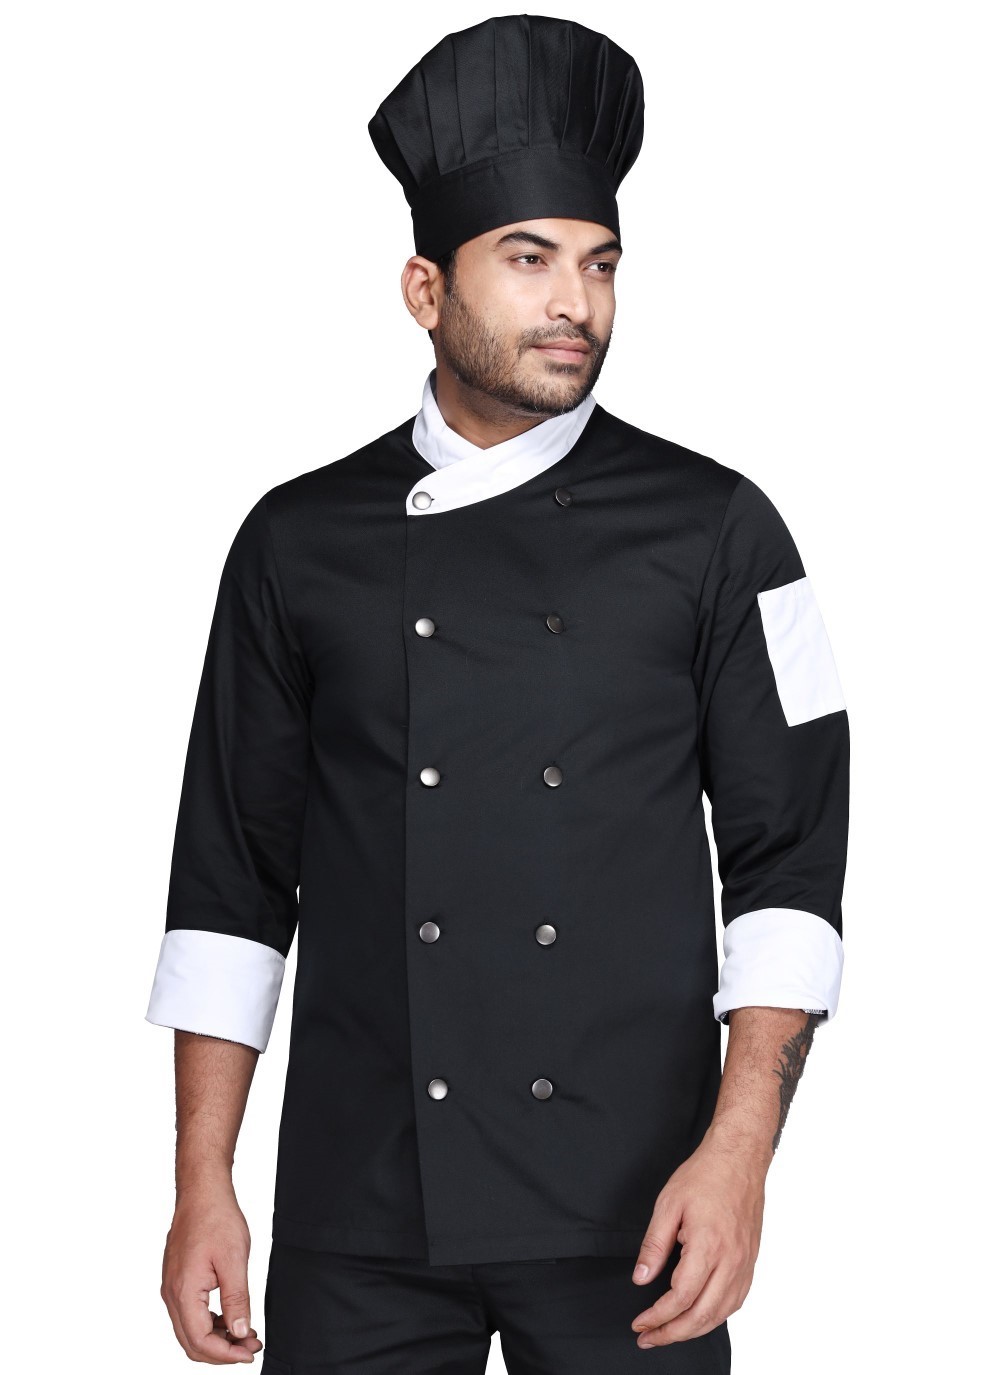 Black Chef Cap made of high-quality, soft and comfortable cotton blend fabric and makes you feel more lightweight and comfortable.